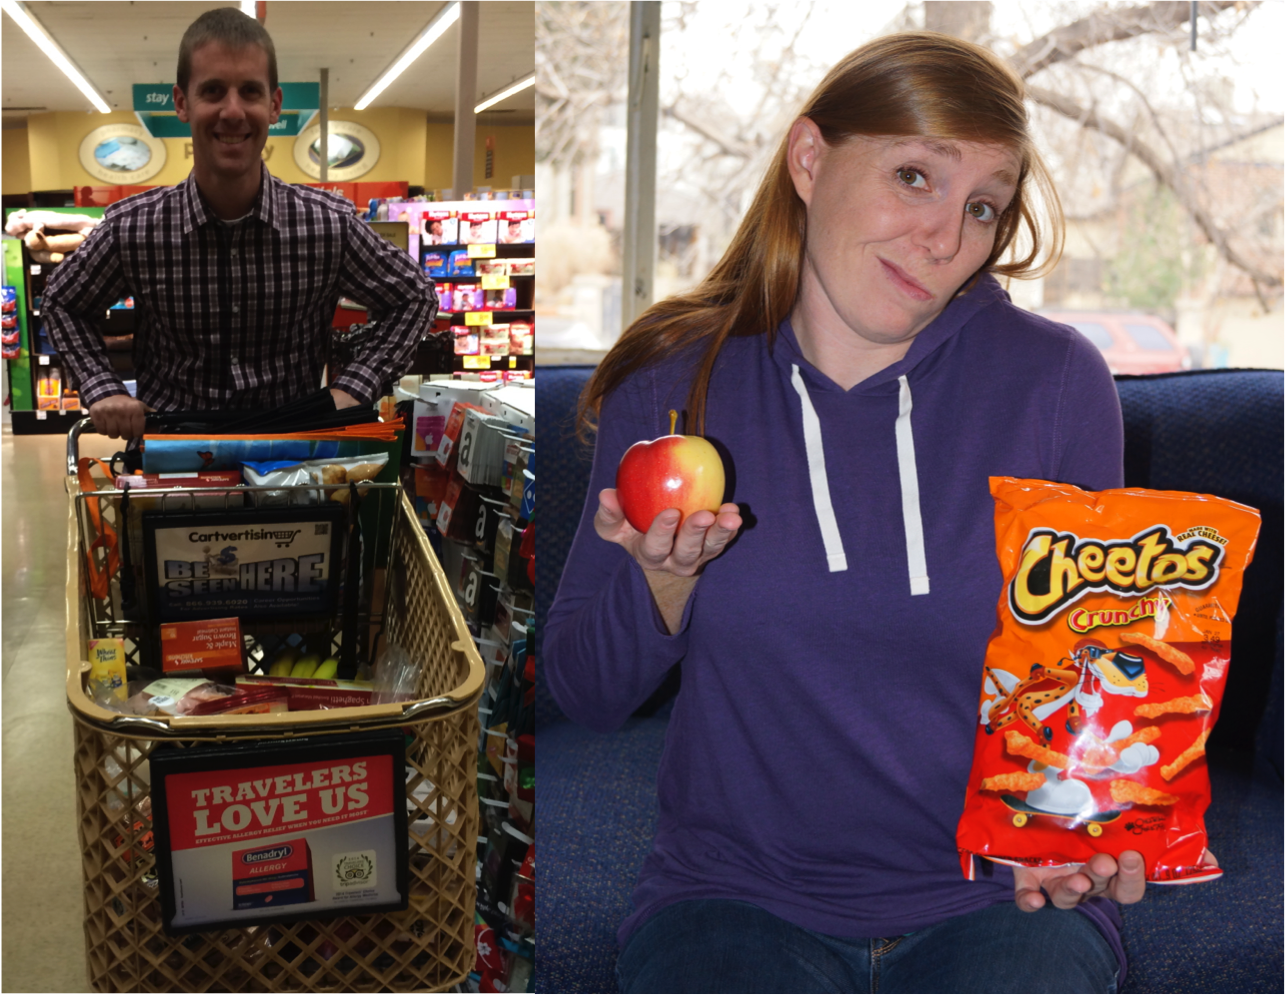 Cheetos or an apple - why grocery shopping is important